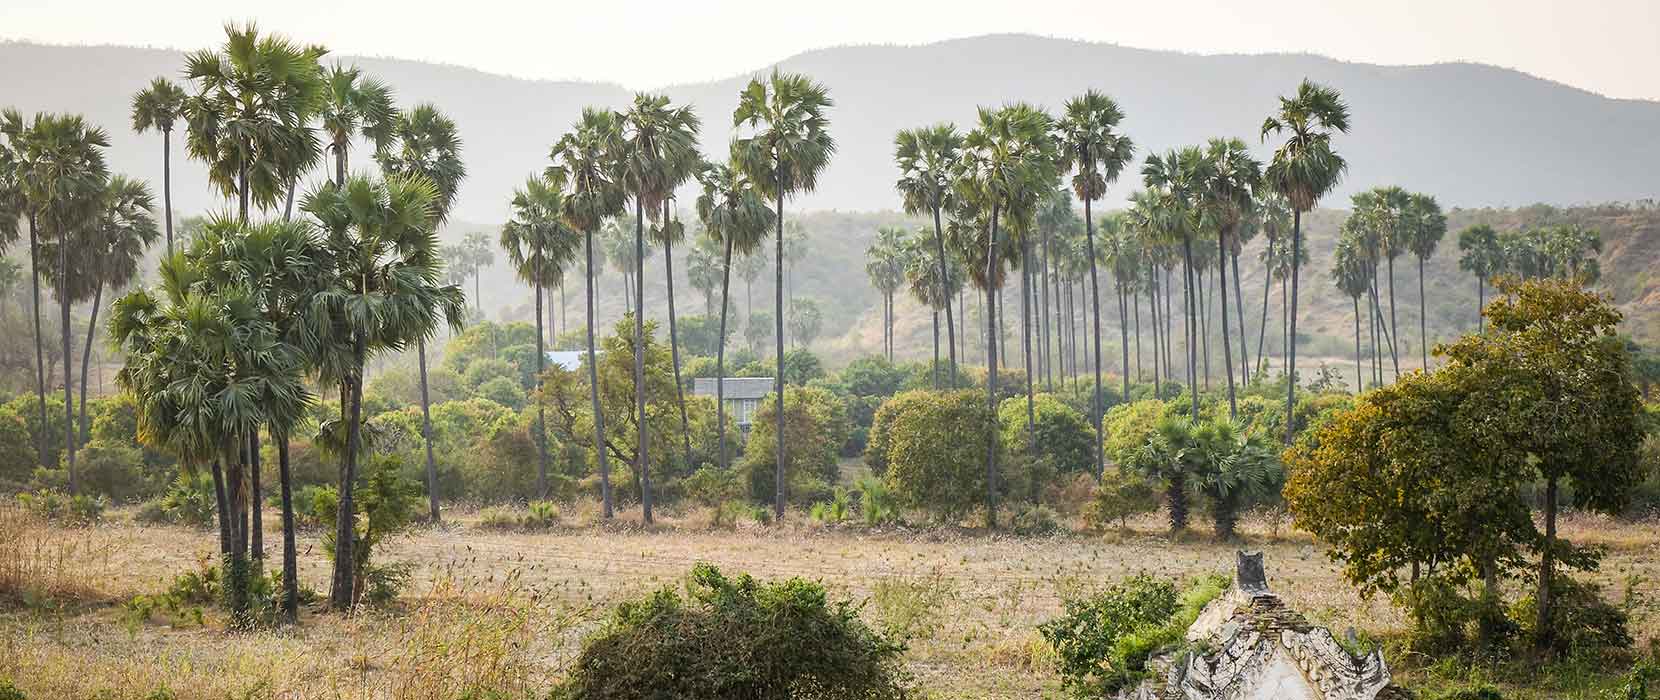 Myanmar landscape with tall palms, trees, and forested mountains in the background, with low lying dwellings in the foreground.